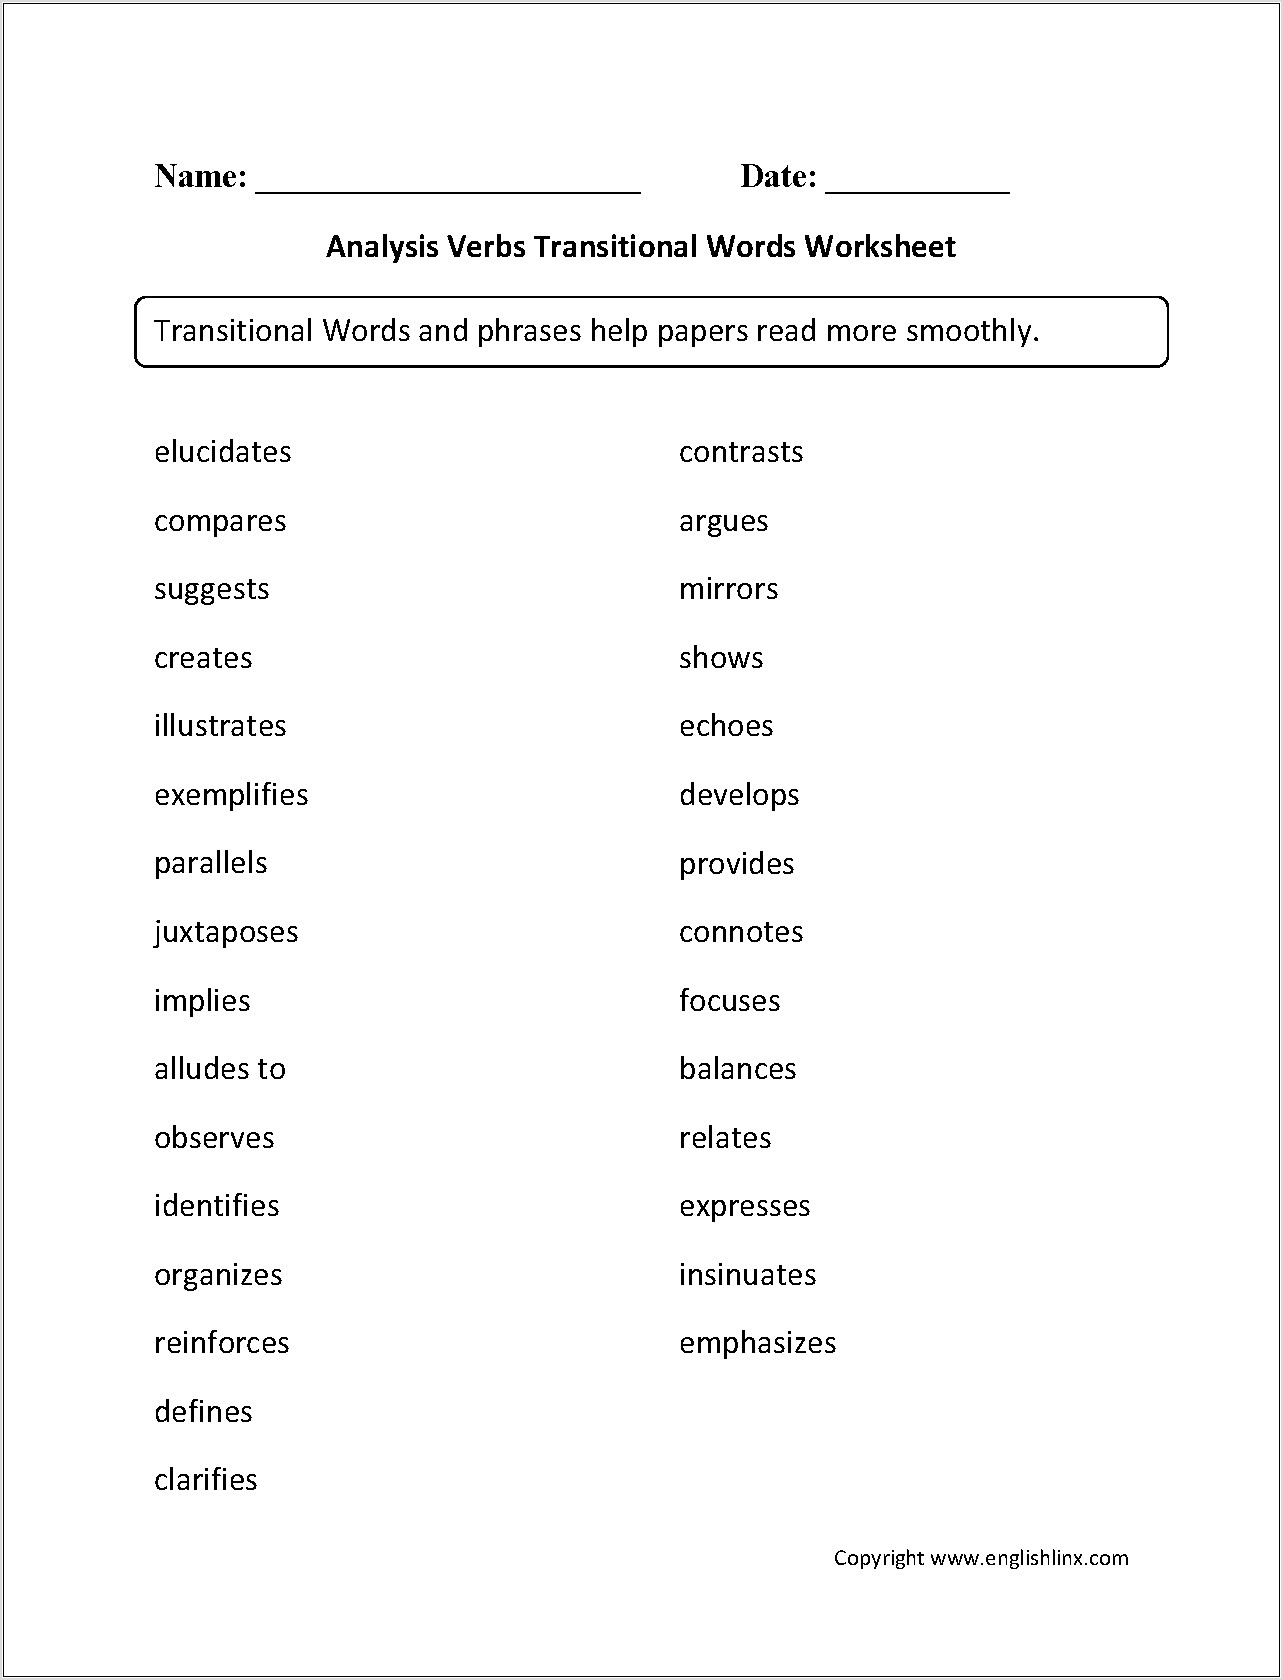 Transitional Words Worksheet Sequencing Part 1